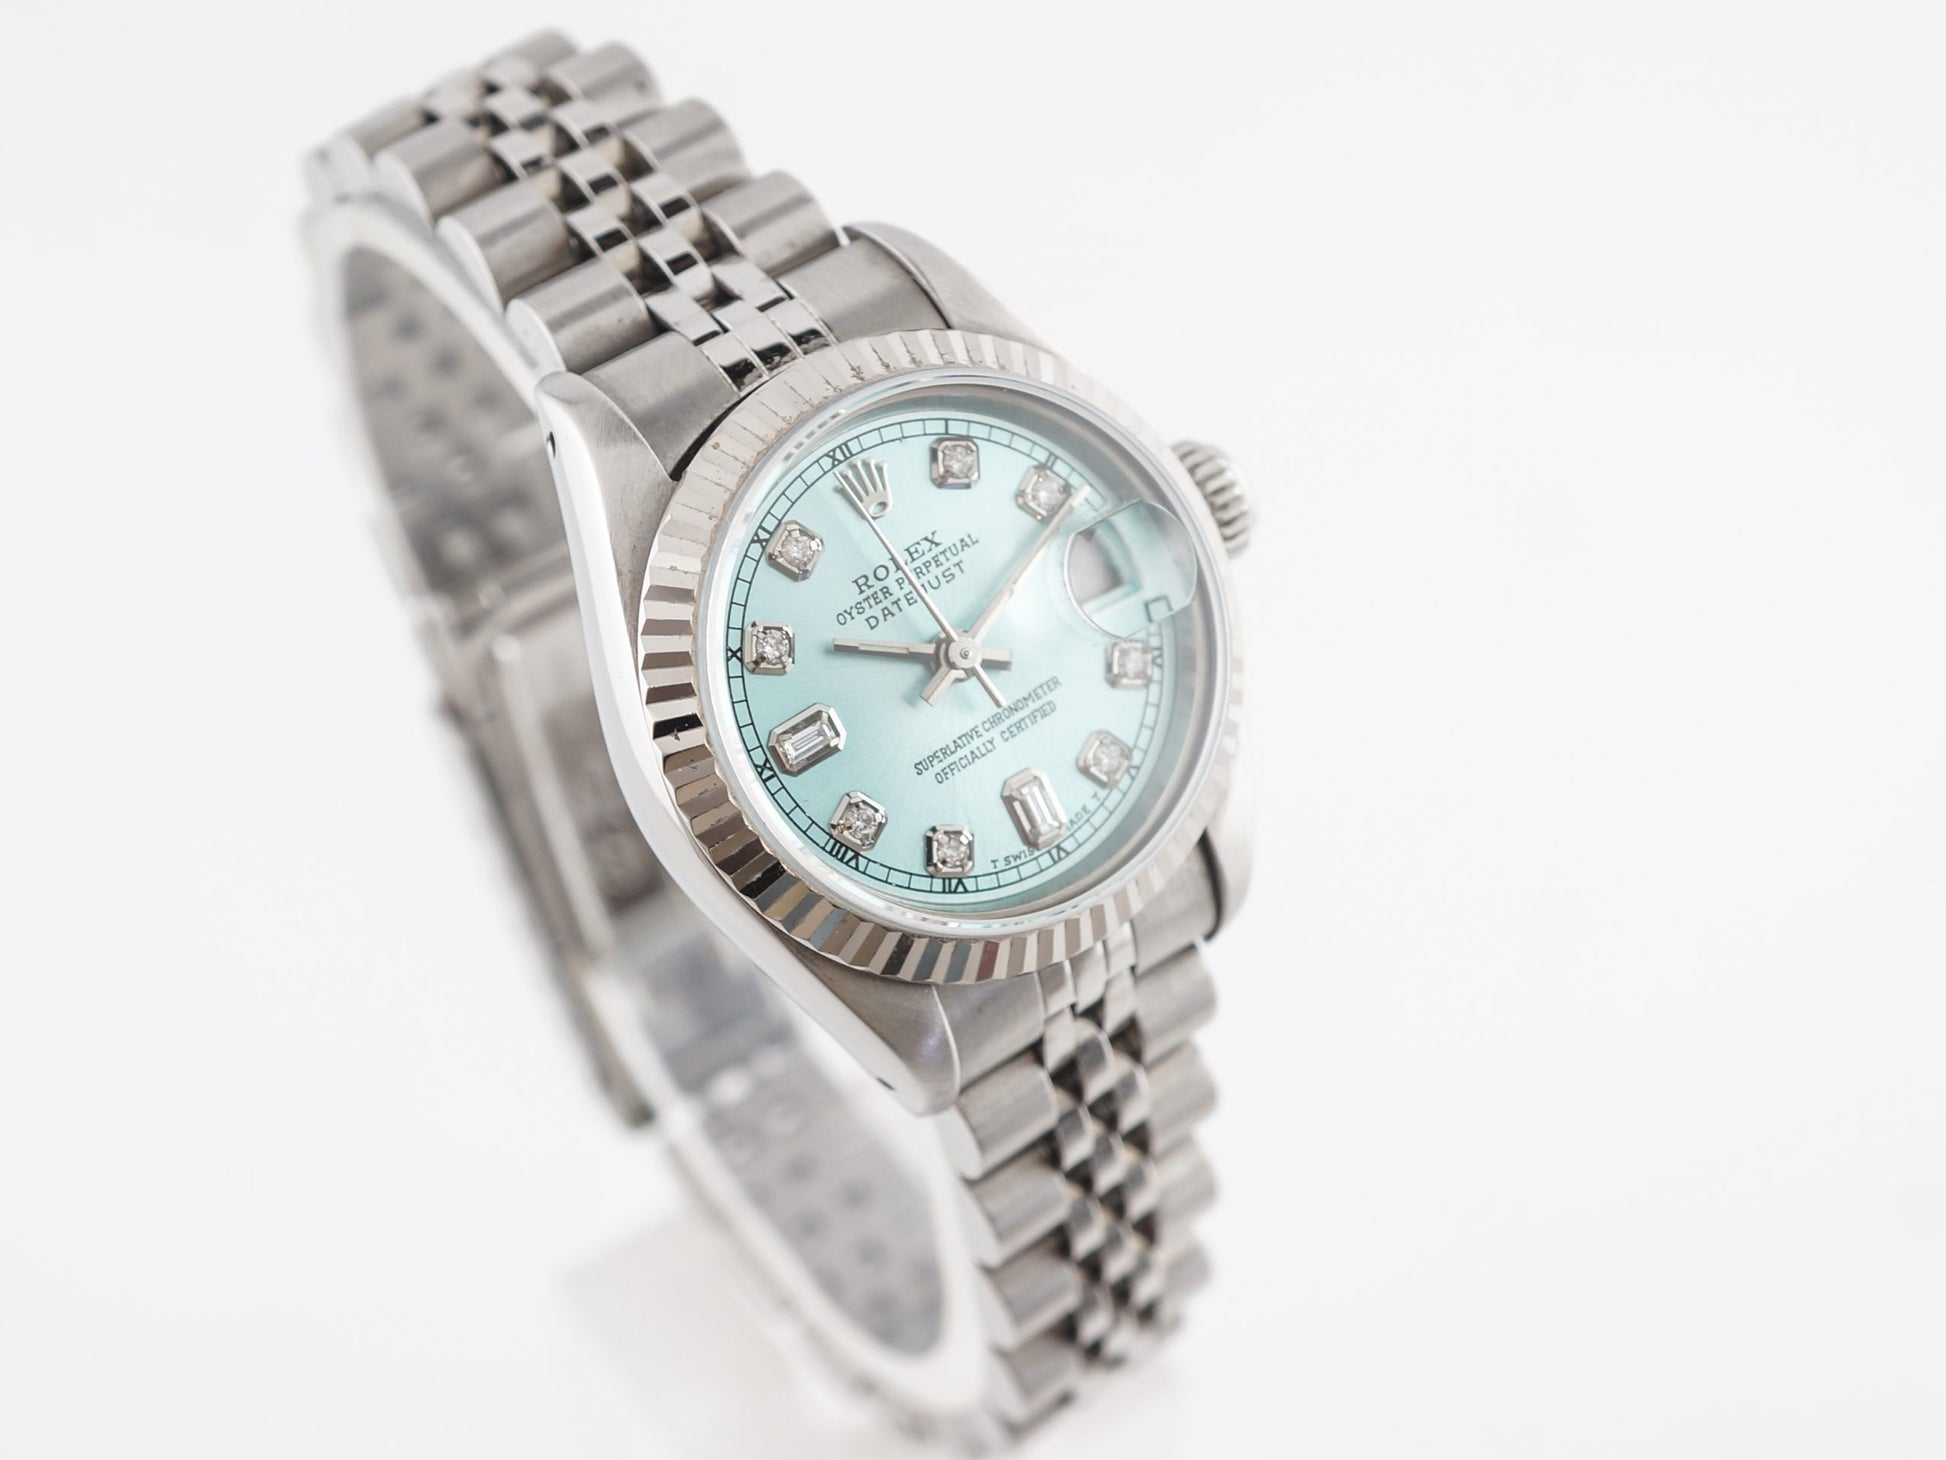 Rolex Datejust w/ Diamond Dial in Stainless Steel